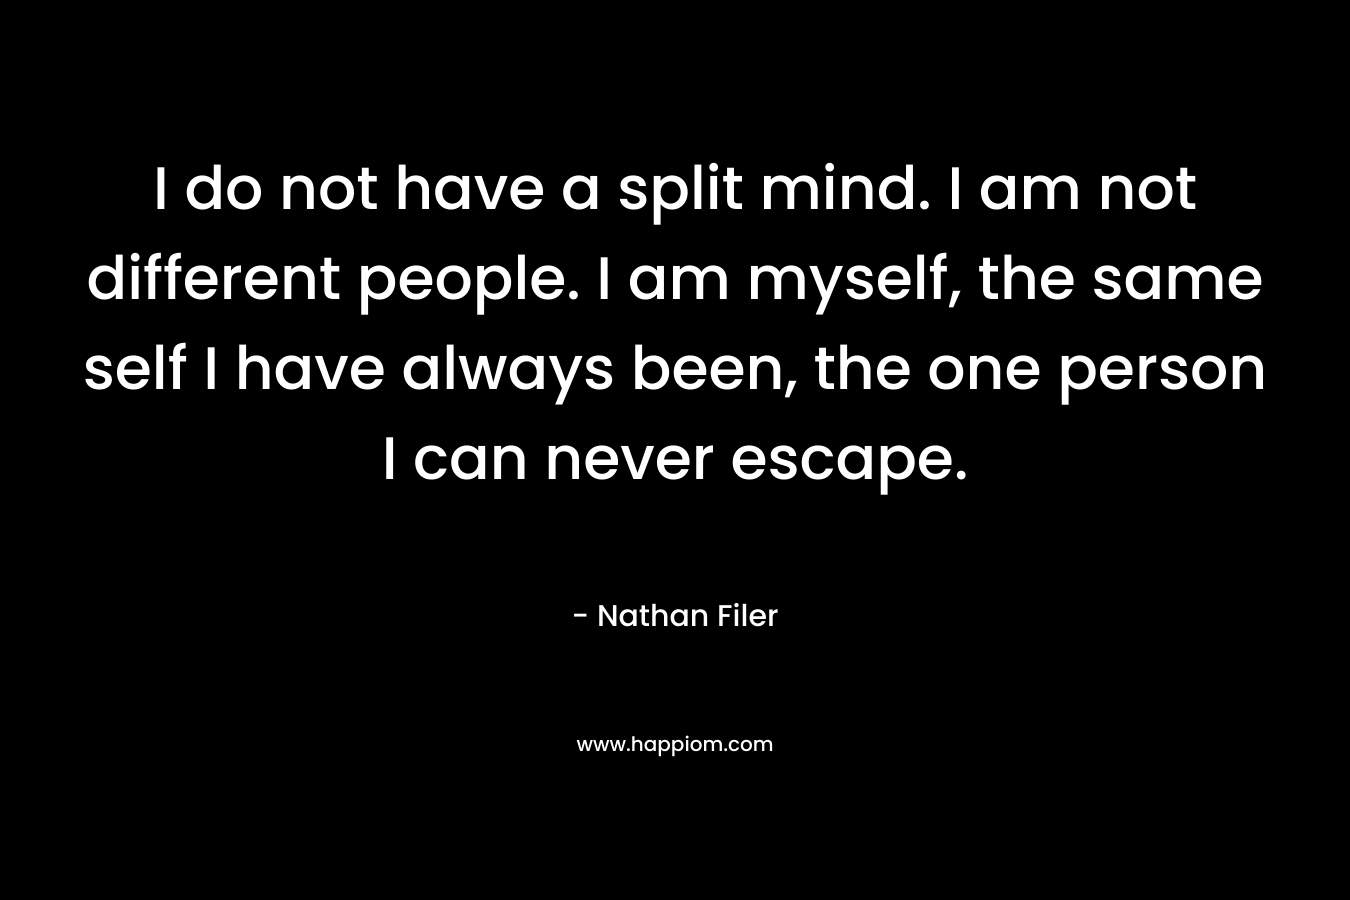 I do not have a split mind. I am not different people. I am myself, the same self I have always been, the one person I can never escape. – Nathan Filer